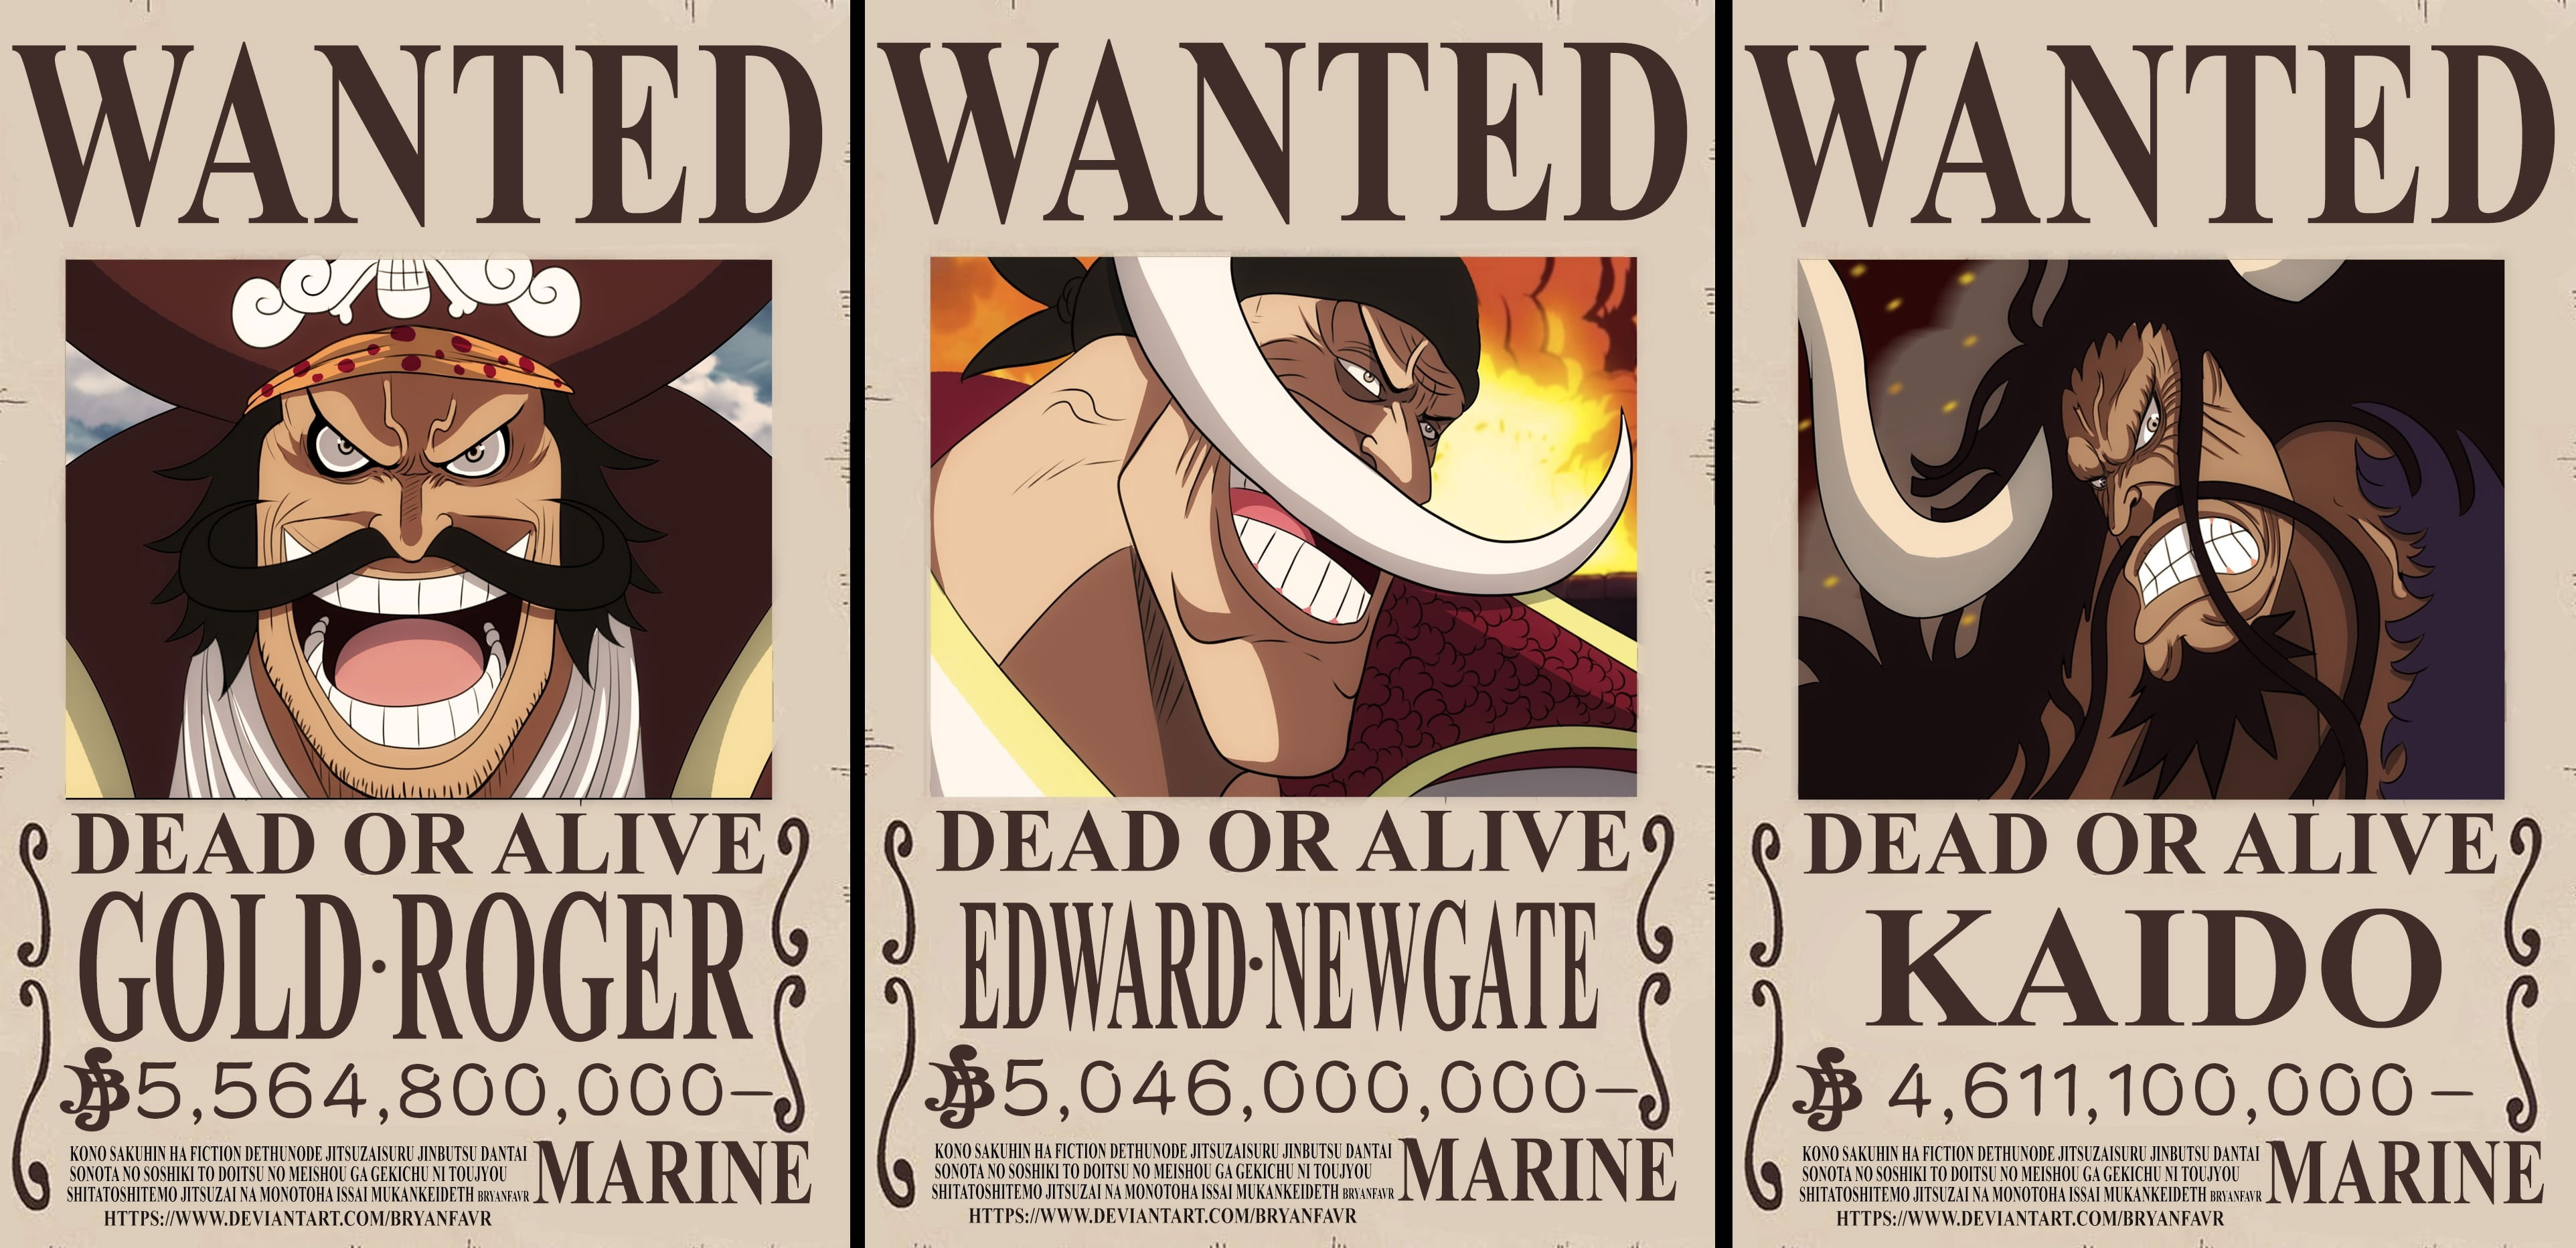 Wallpaper ID 363791  Anime One Piece Phone Wallpaper Gol D Roger  Seagull One Piece Buggy One Piece Scopper Gaban Crocus One Piece  1080x2340 free download